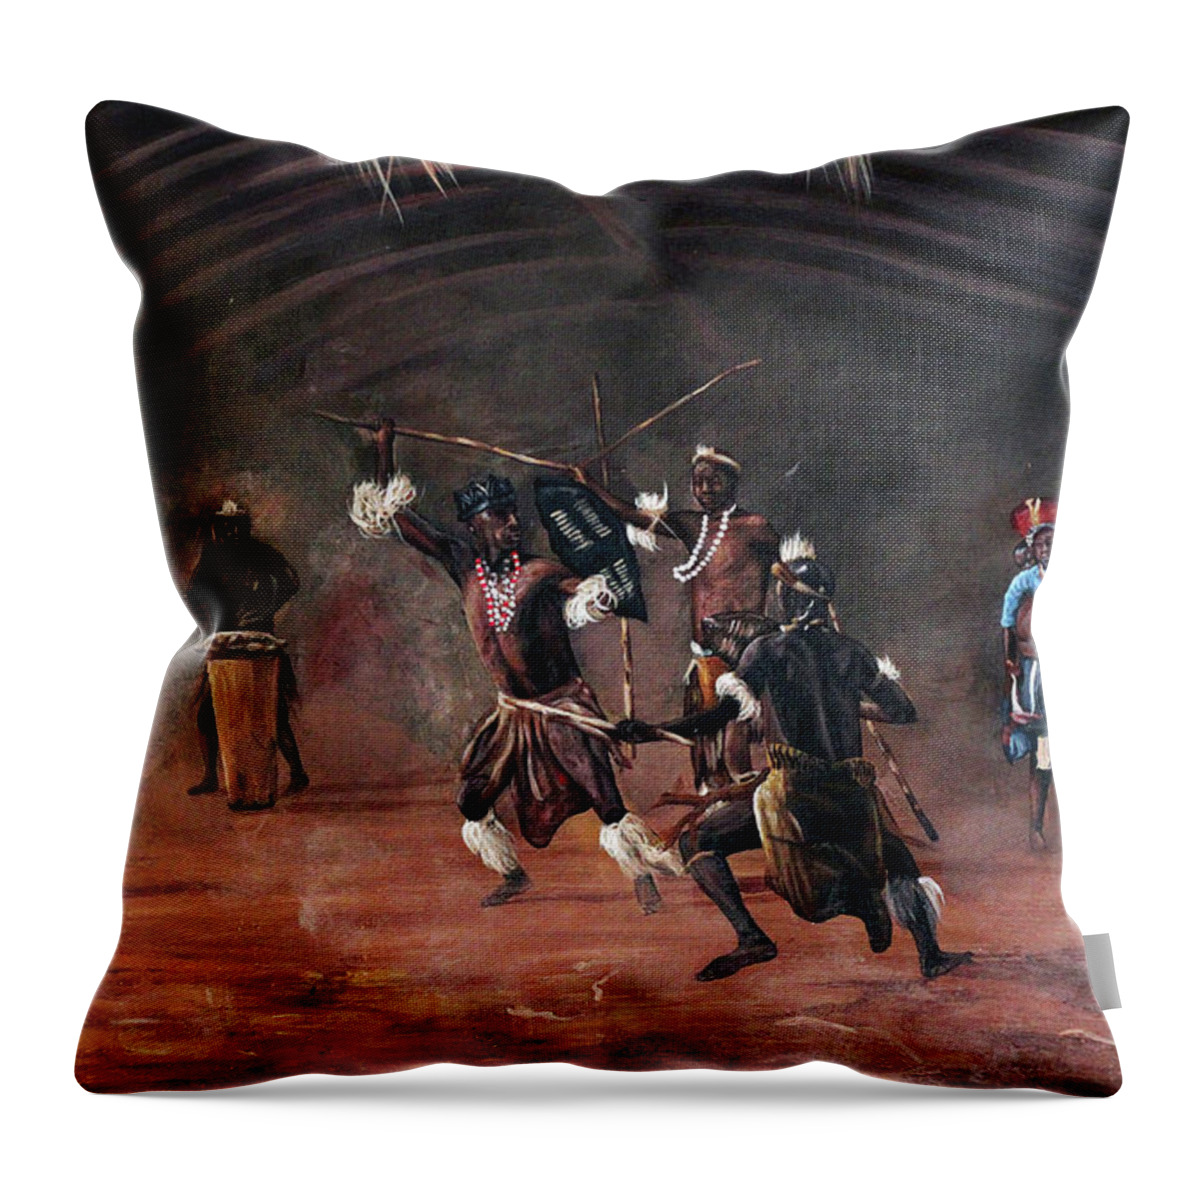 African Art Throw Pillow featuring the painting Dance Of Spears by Ronnie Moyo